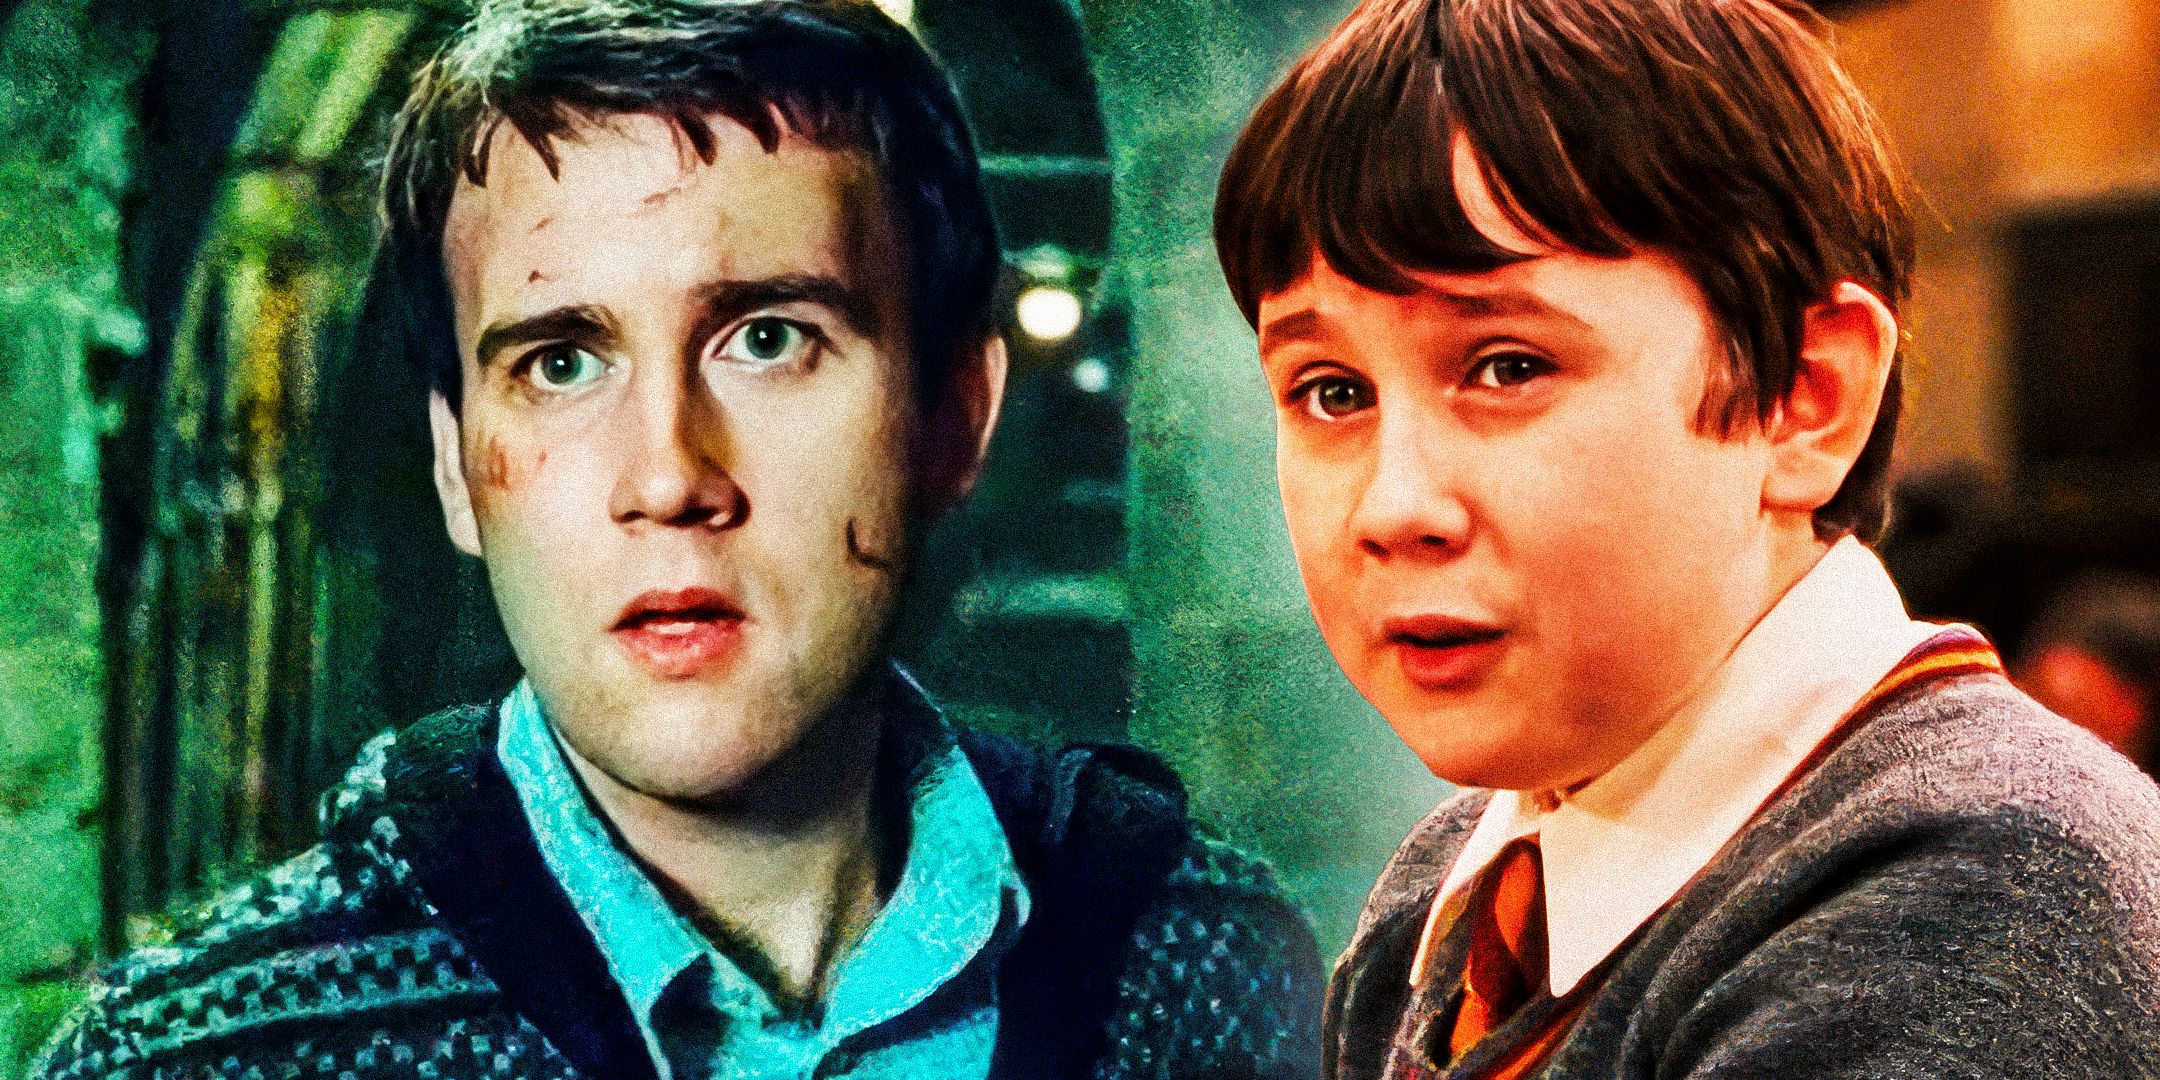 This Harry Potter Theory Solves A Big Neville Longbottom Mystery (But Makes His Story More Tragic)